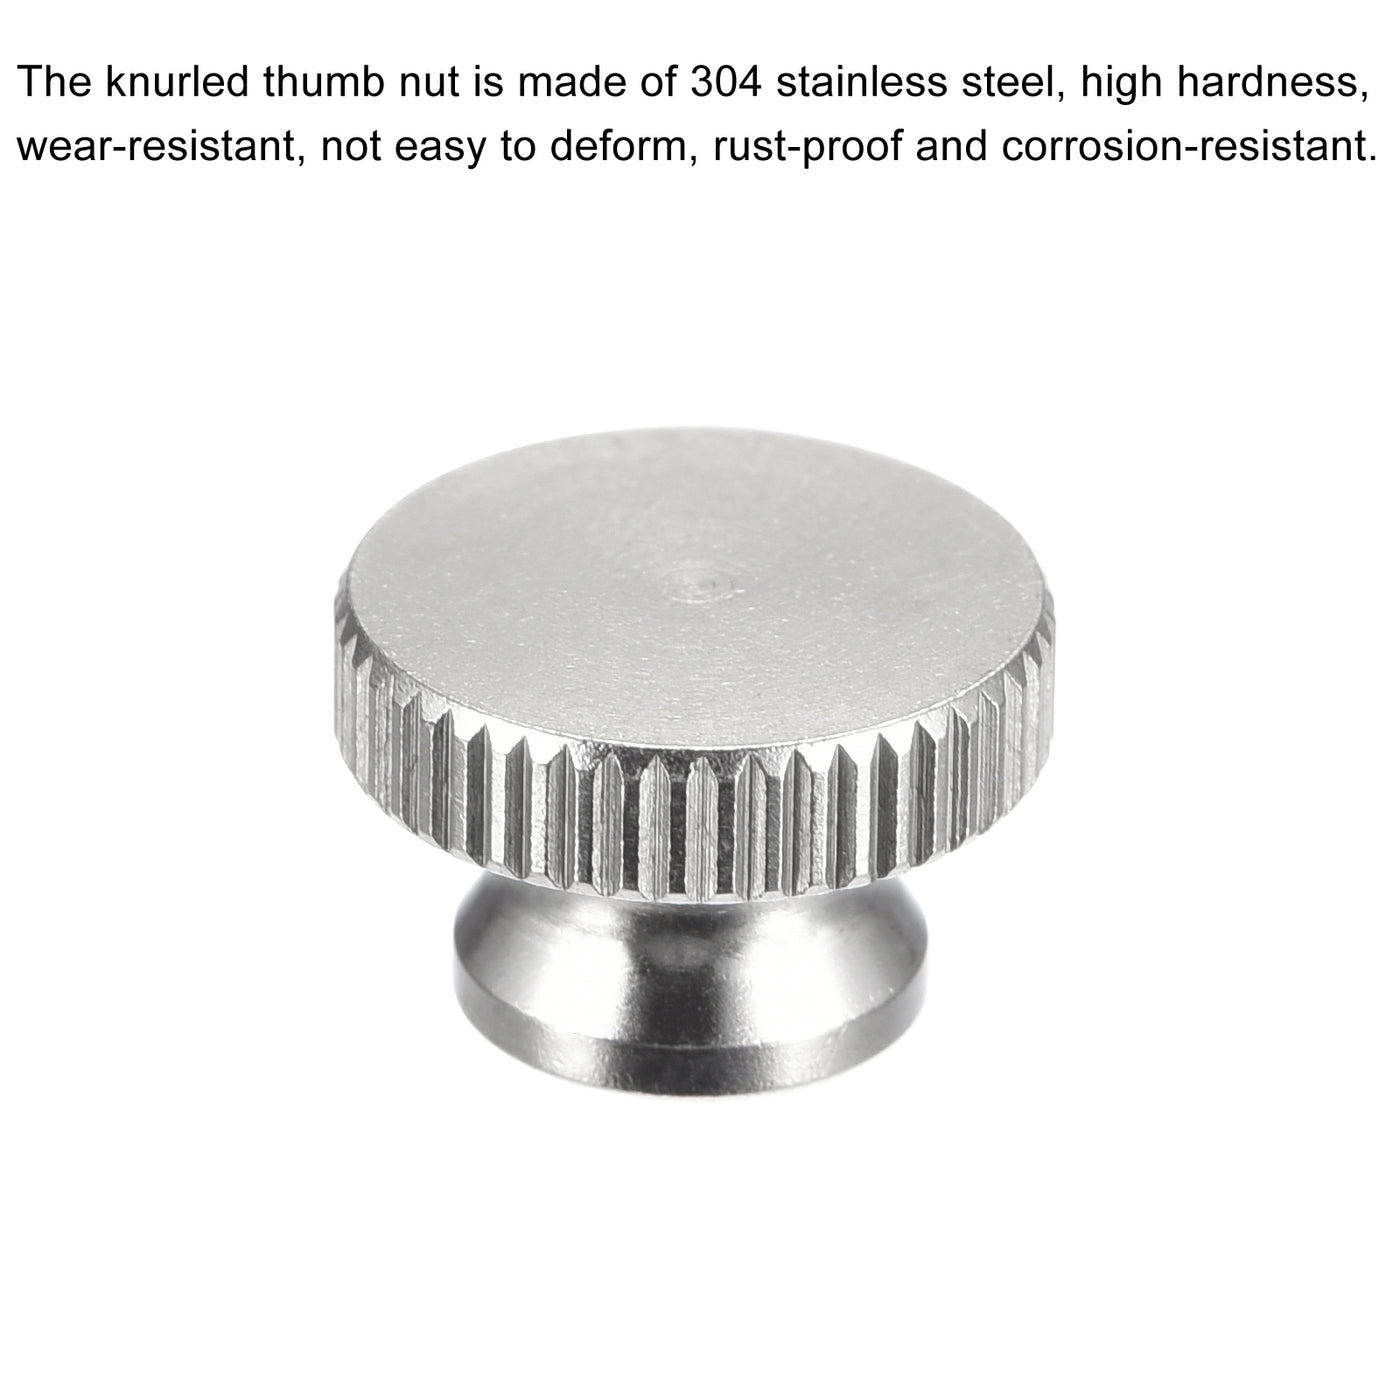 uxcell Uxcell Knurled Thumb Nuts, 10pcs M4 x D12mm x H8mm 304 Stainless Steel Blind Hole Nuts